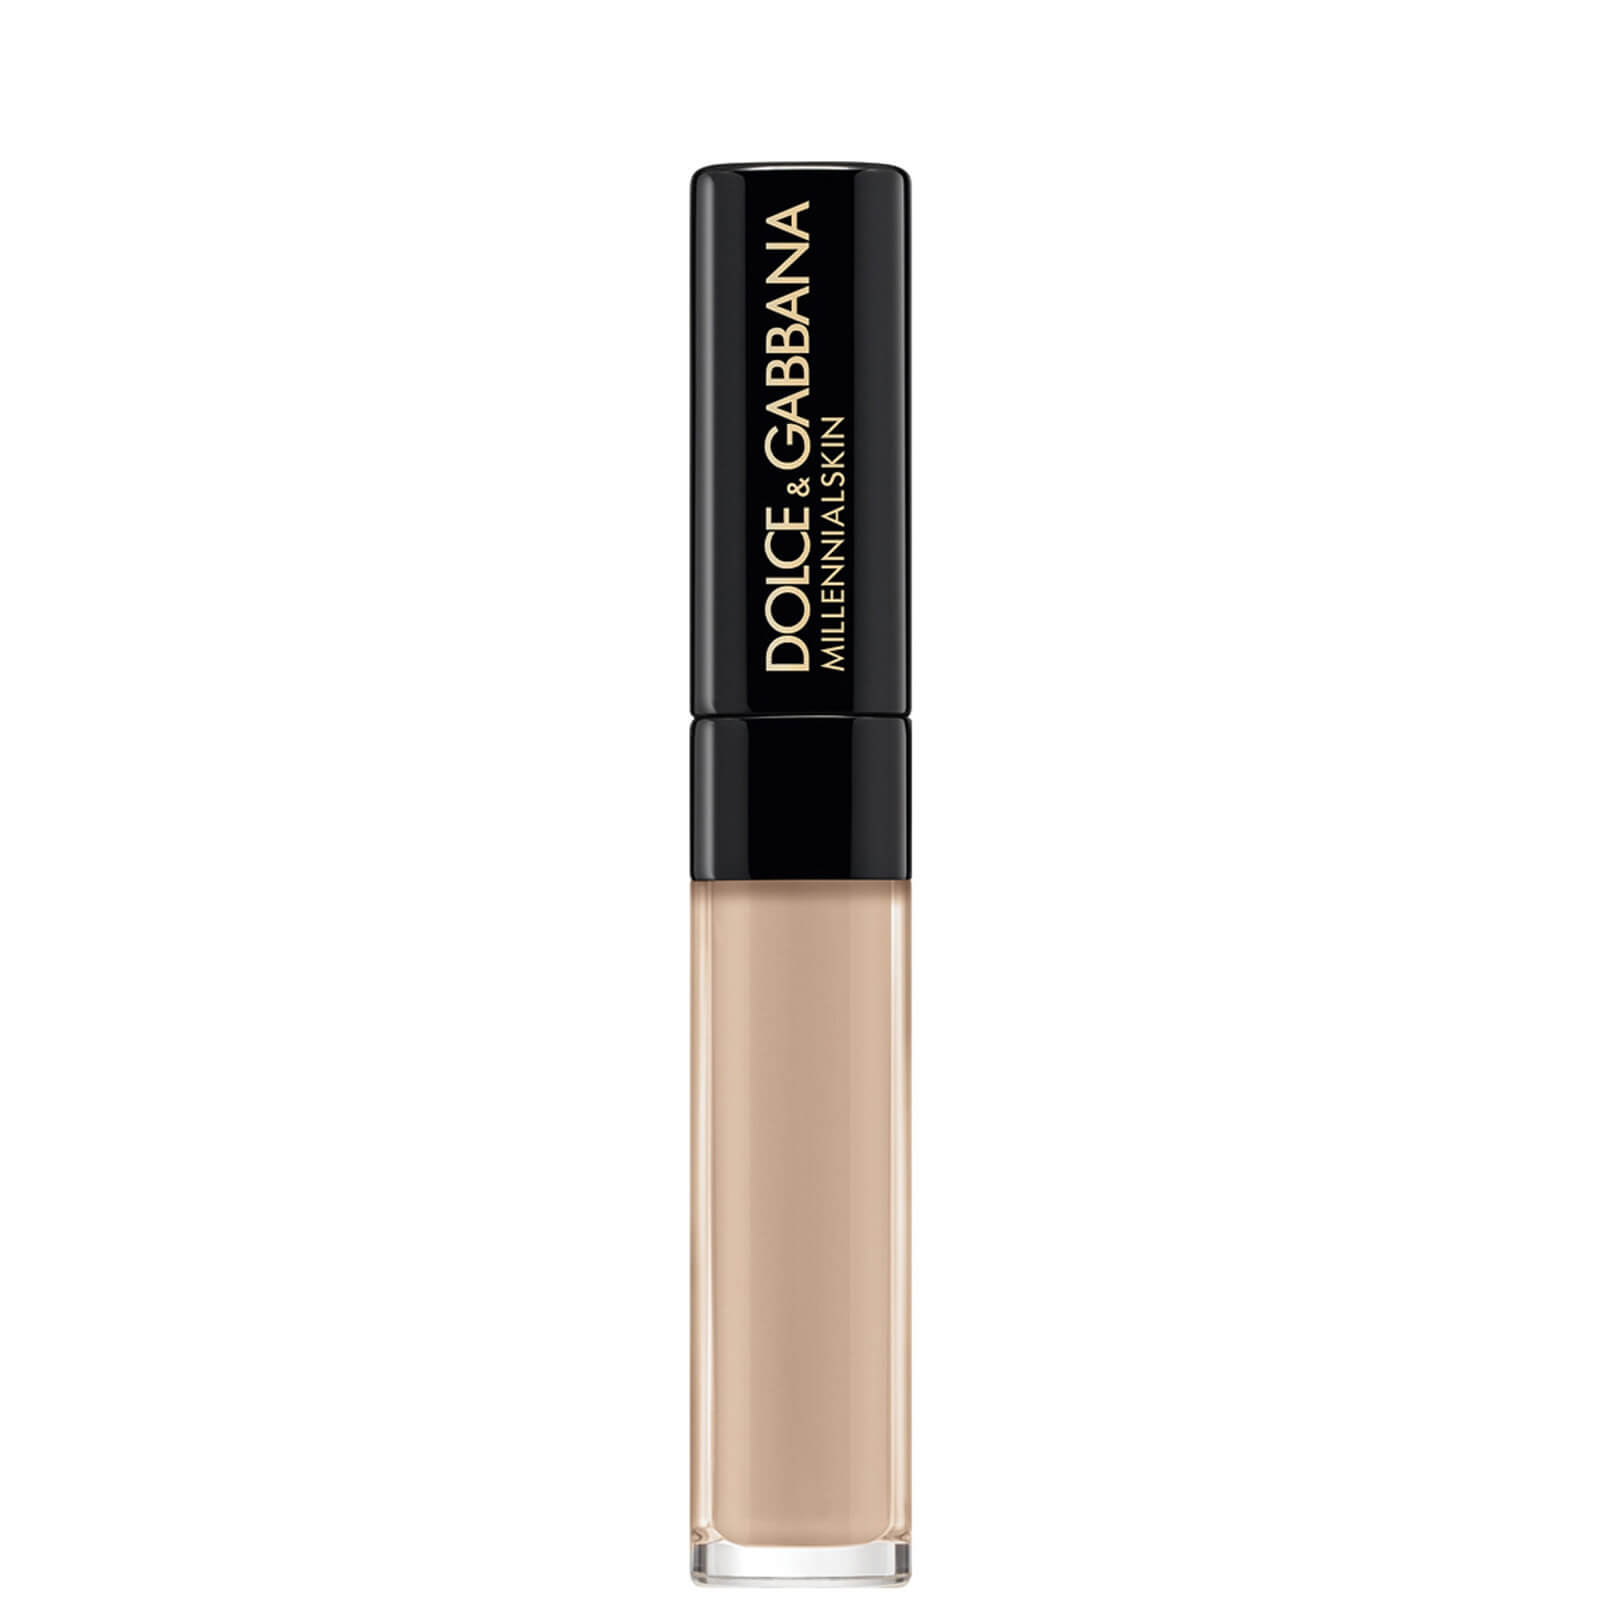 Image of Dolce&Gabbana Millenialskin On-the-Glow Concealer 5ml (Various Shades) - 2 Light